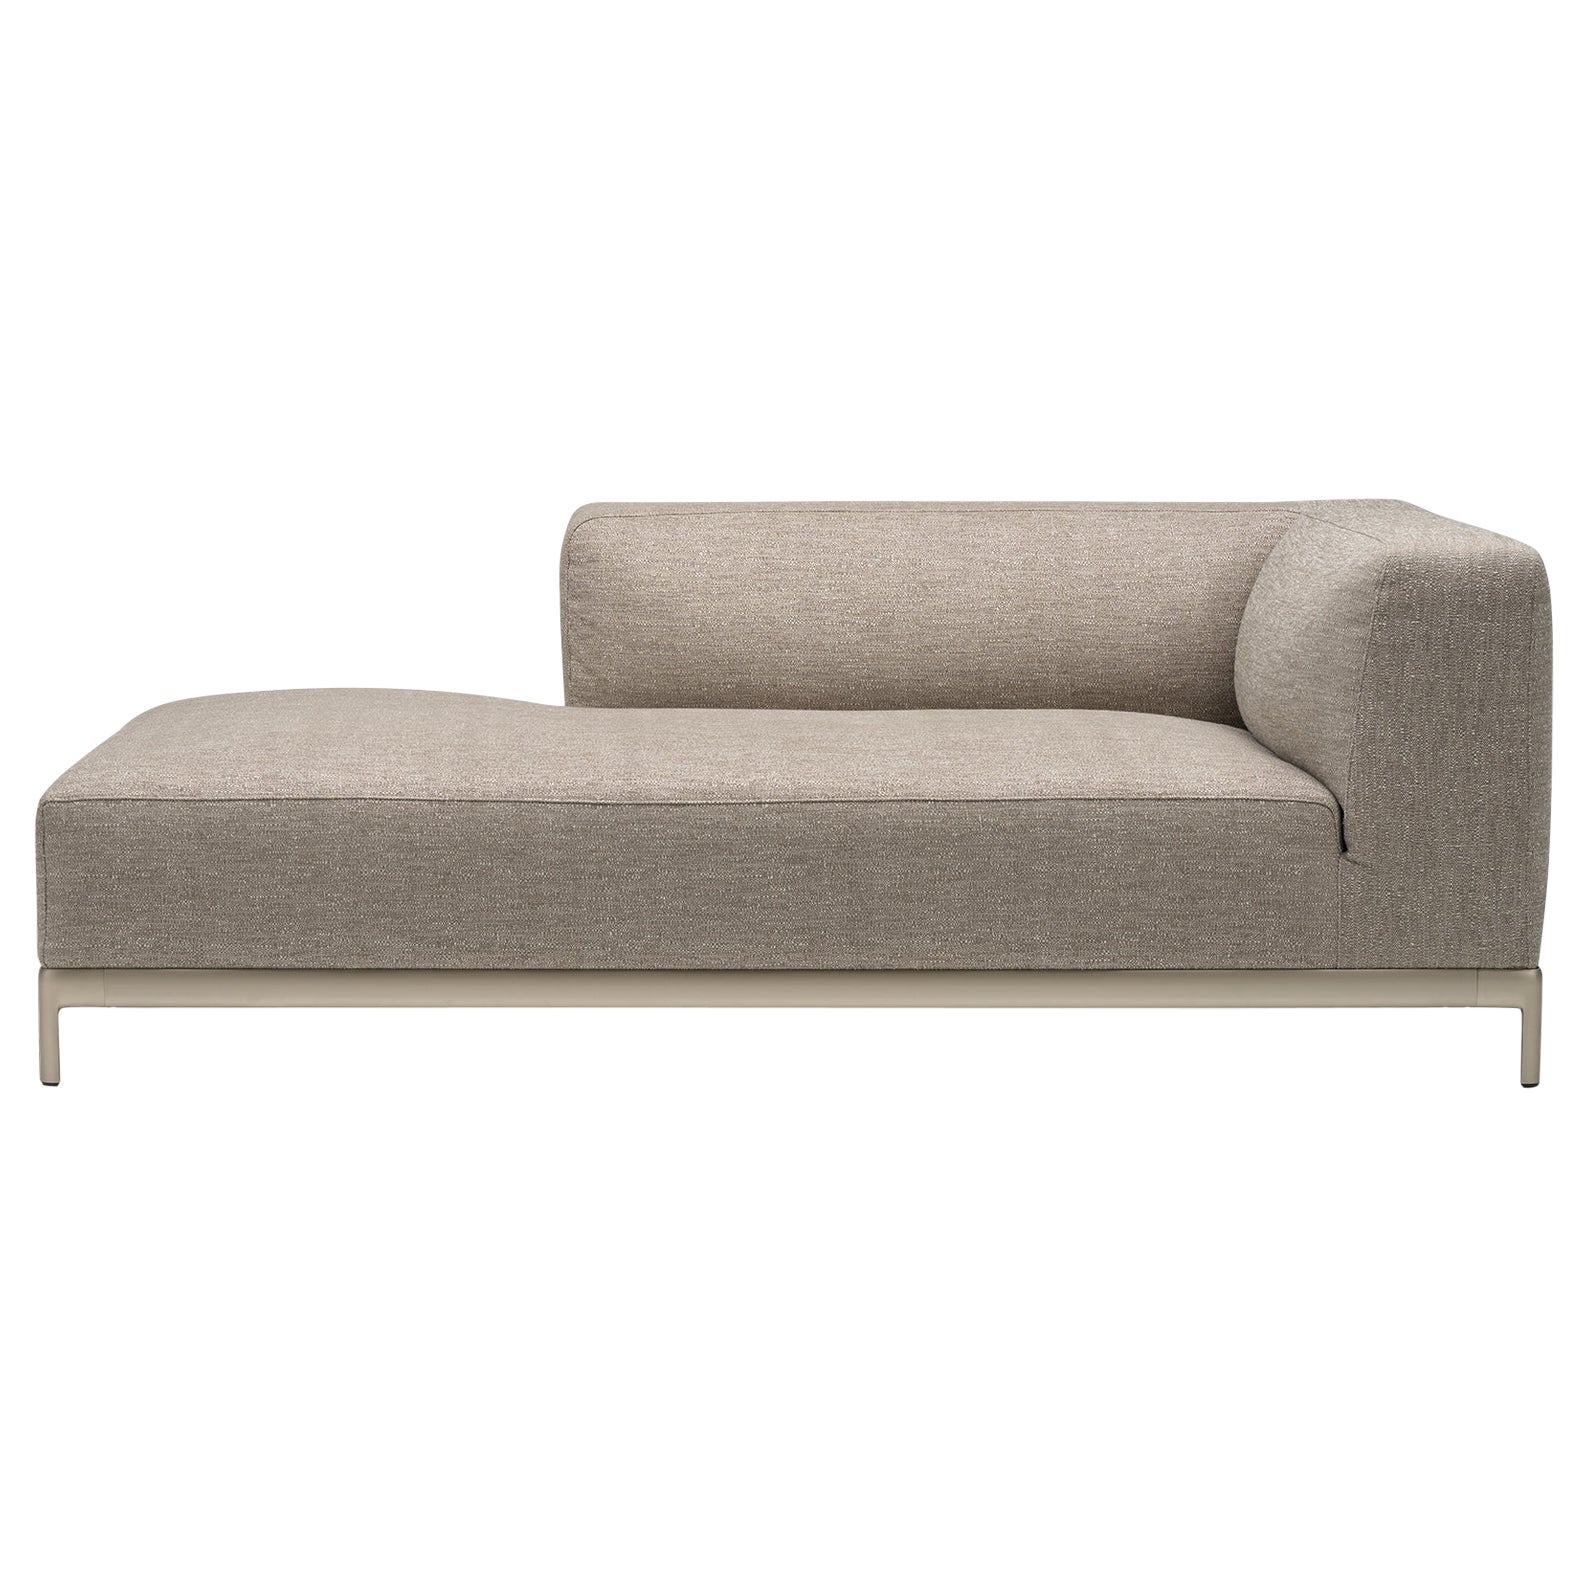 Alias P38 AluZen Soft Angular Sofa in Brown Upholstery & Anodized Gold Frame For Sale